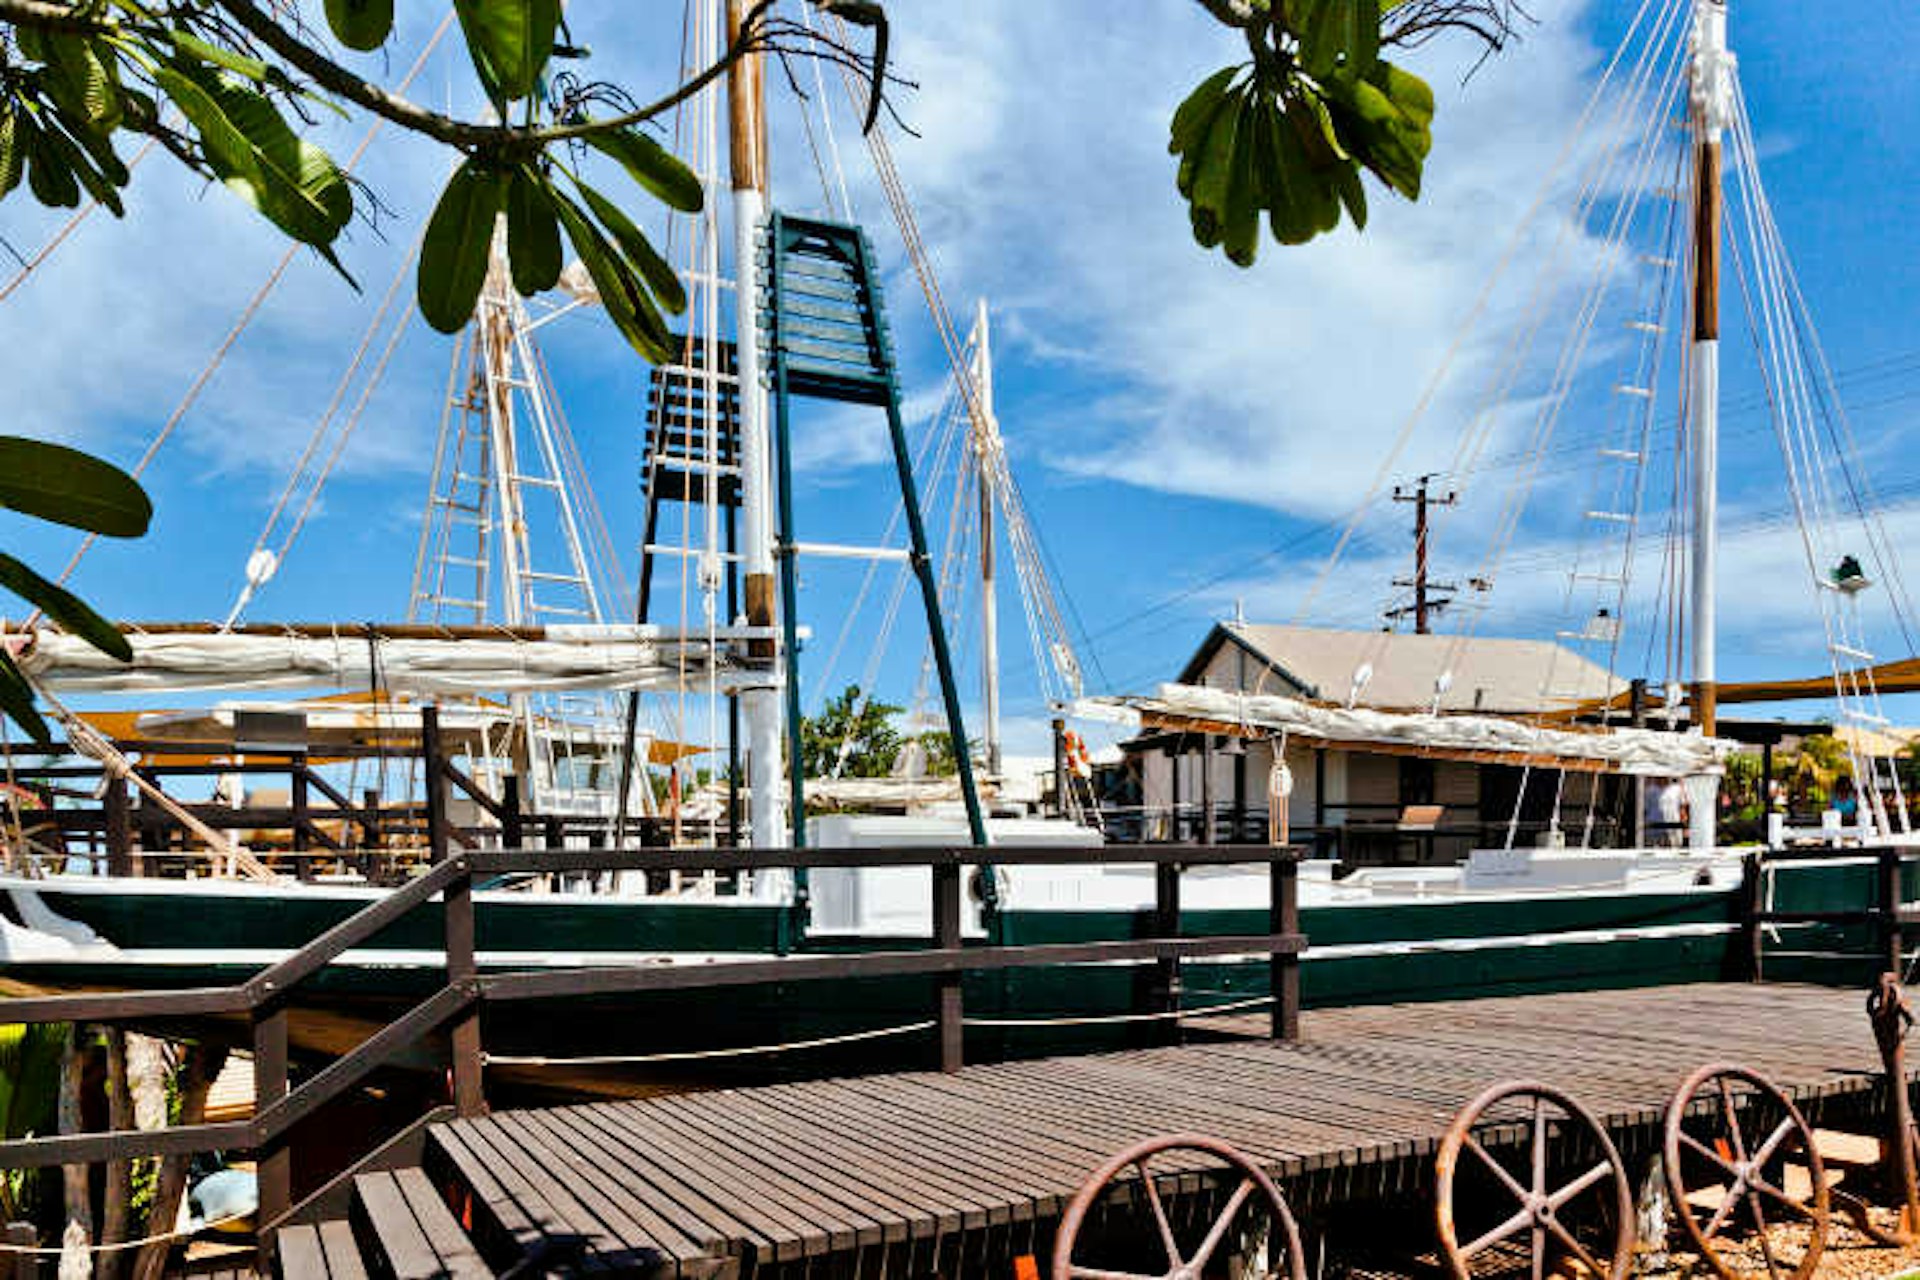 Restored wooden pearl luggers at Broome's Chinatown. Image by Manfred Gottschalk / Lonely Planet Images / Getty Images